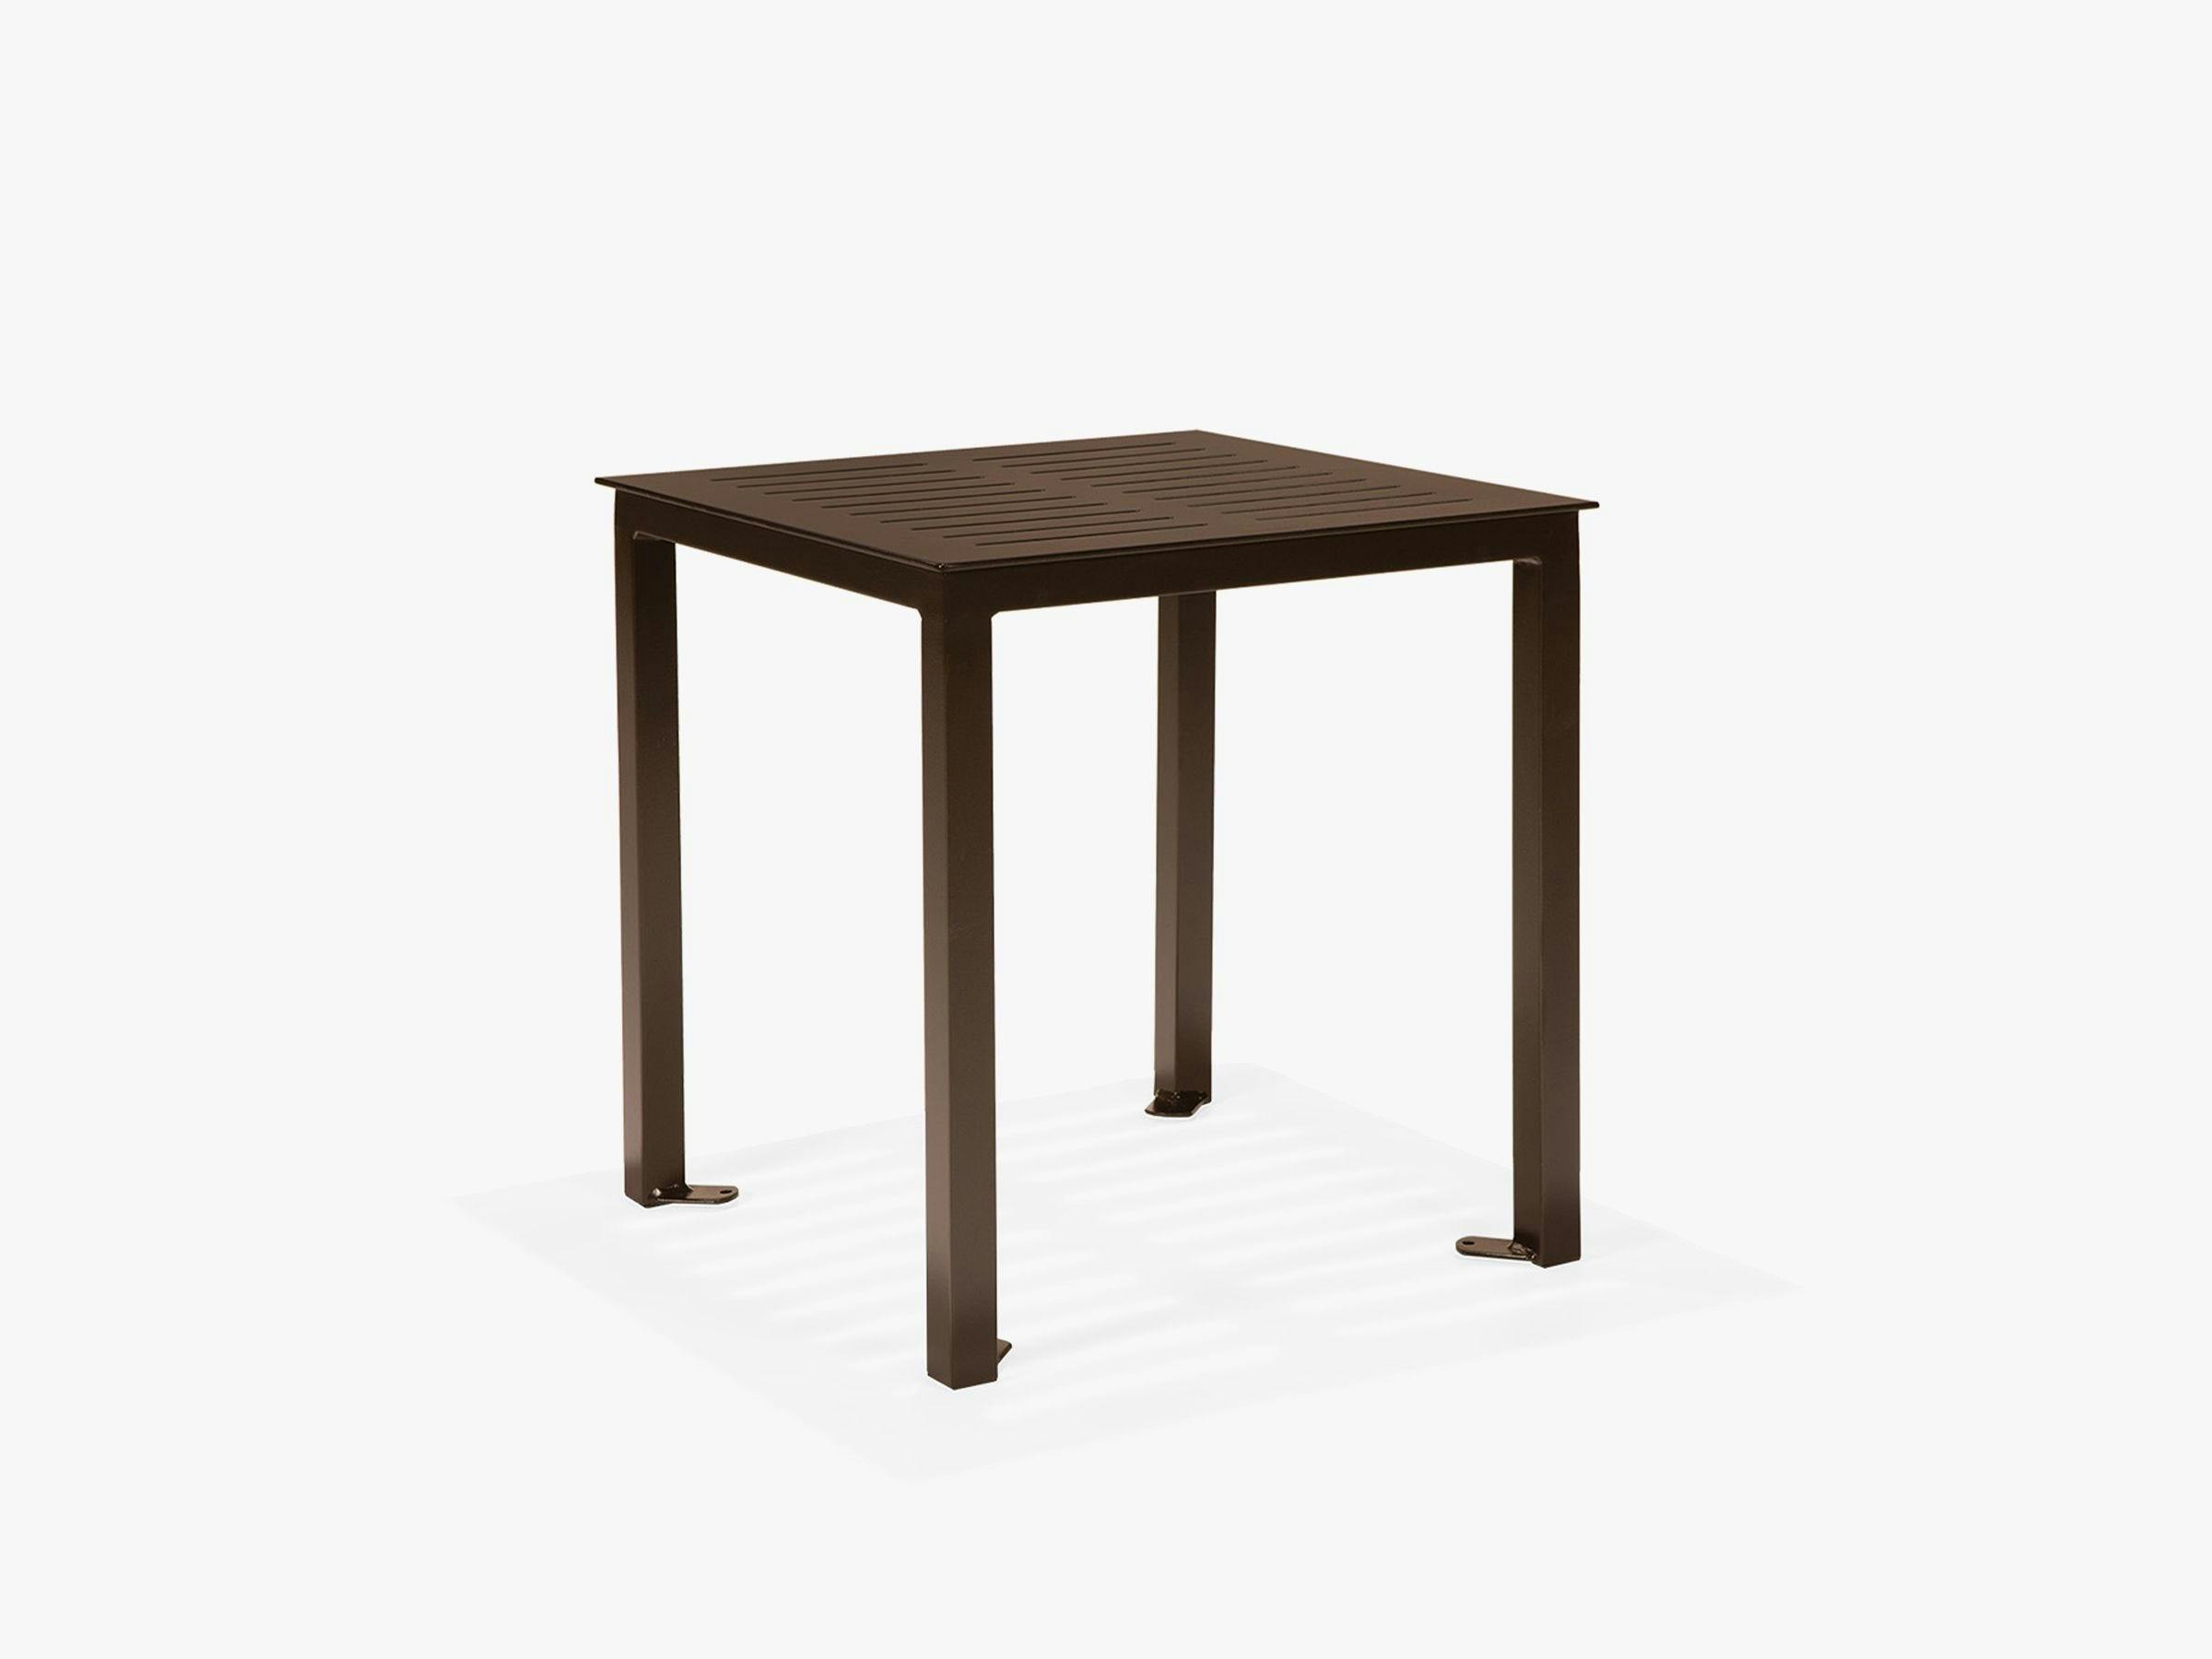 Portico 27" Square Dining Table